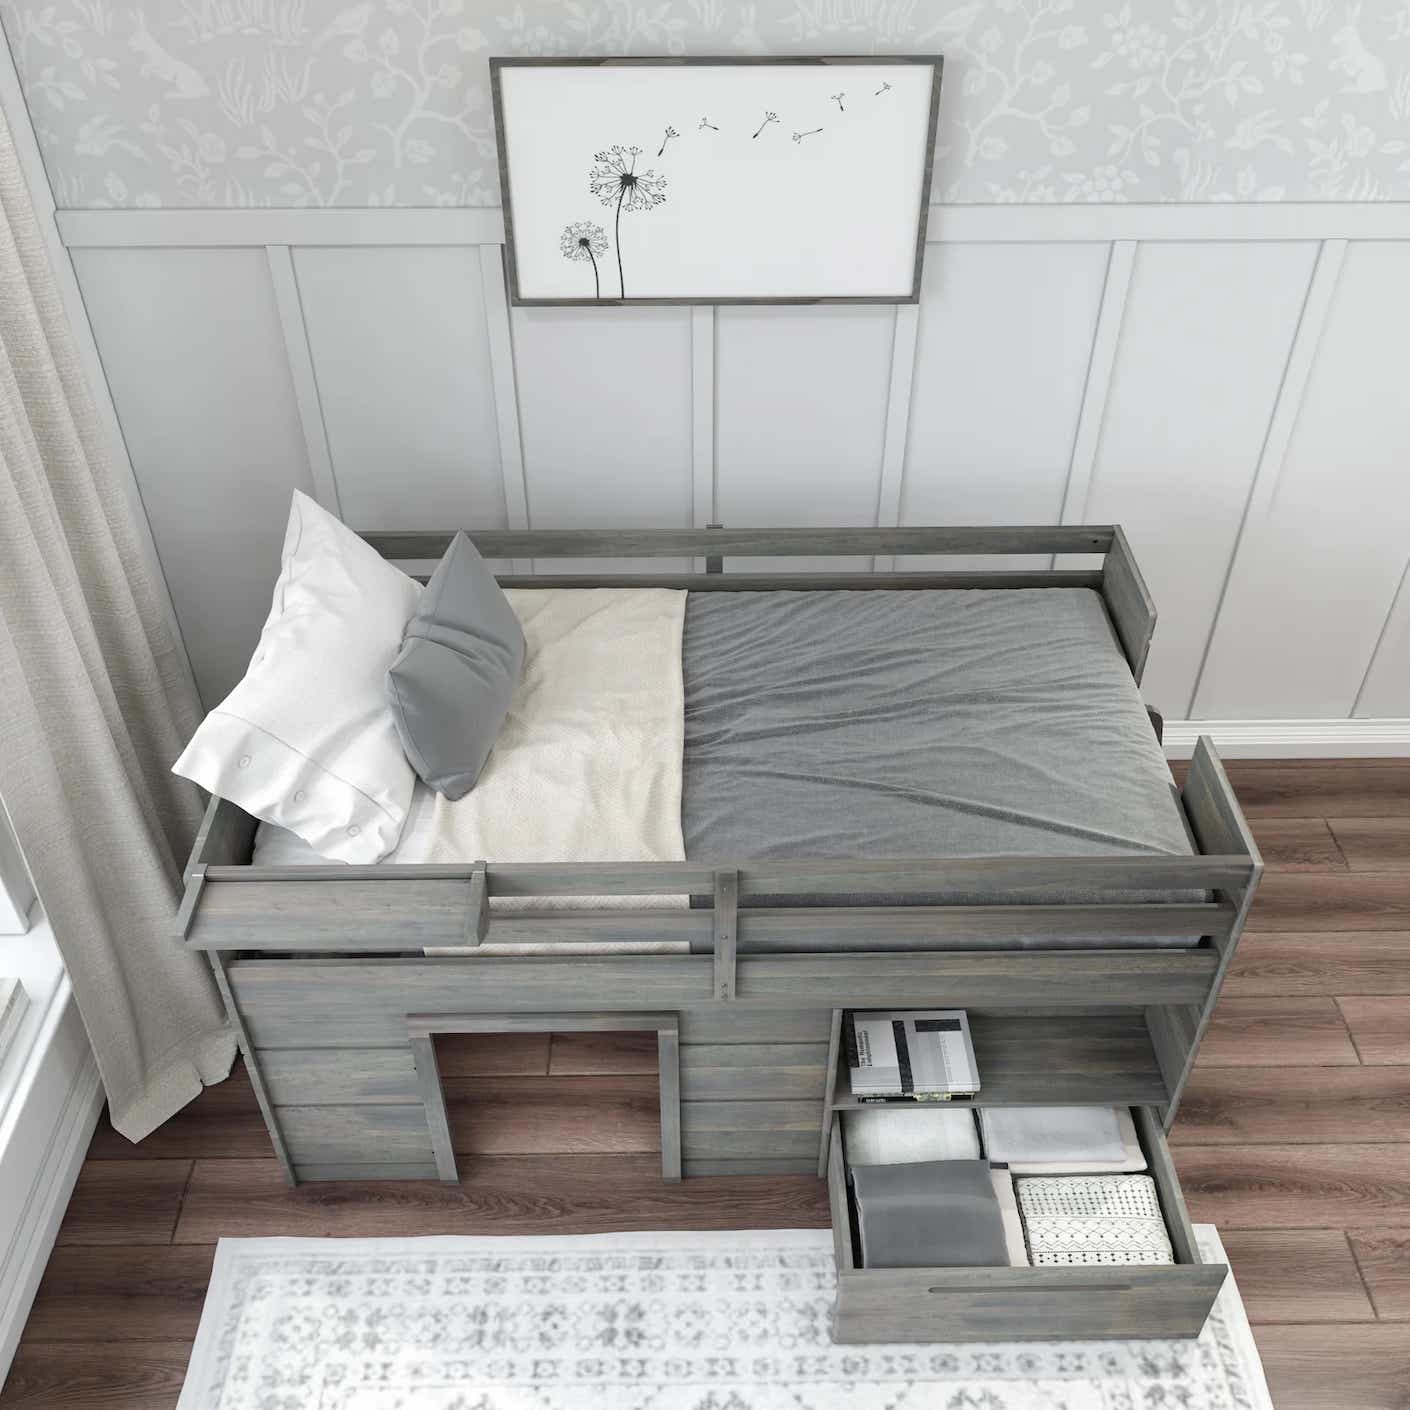 An aerial shot of a grey wooden bunk bed with drawers and storage space under the loft portion.